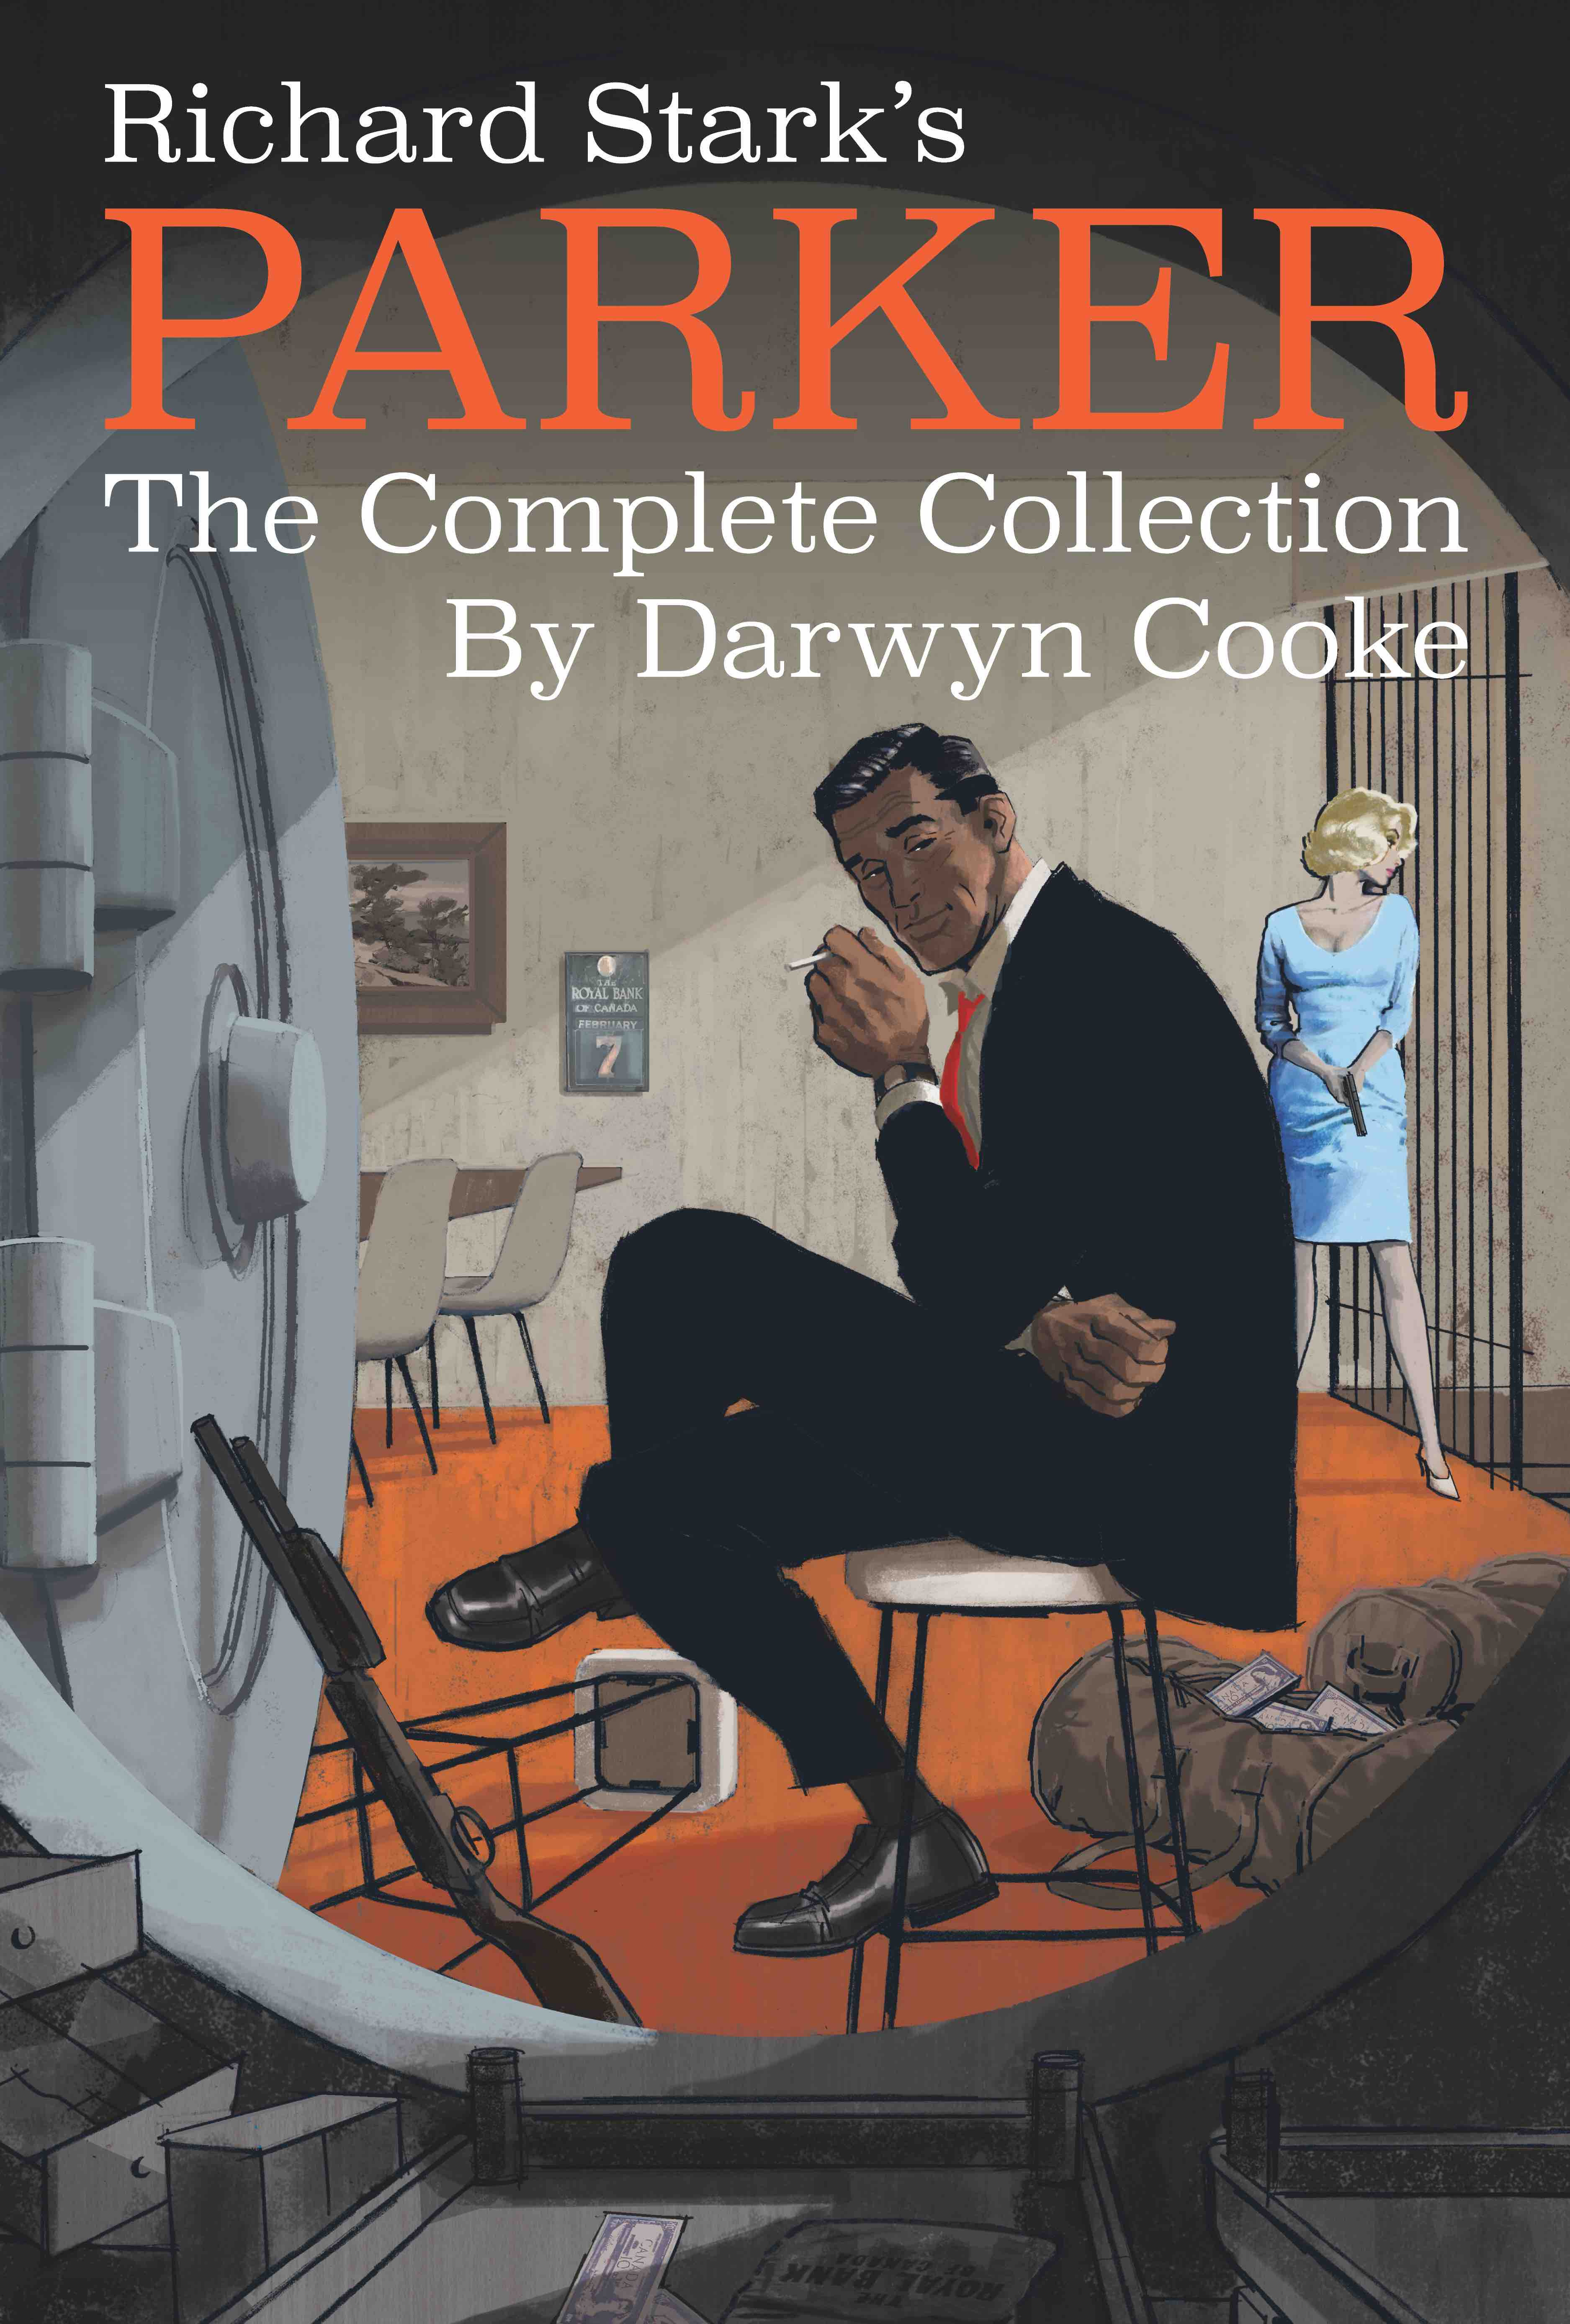 Richard Stark's Parker: The Complete Collection Graphic Novel by Darwyn Cooke